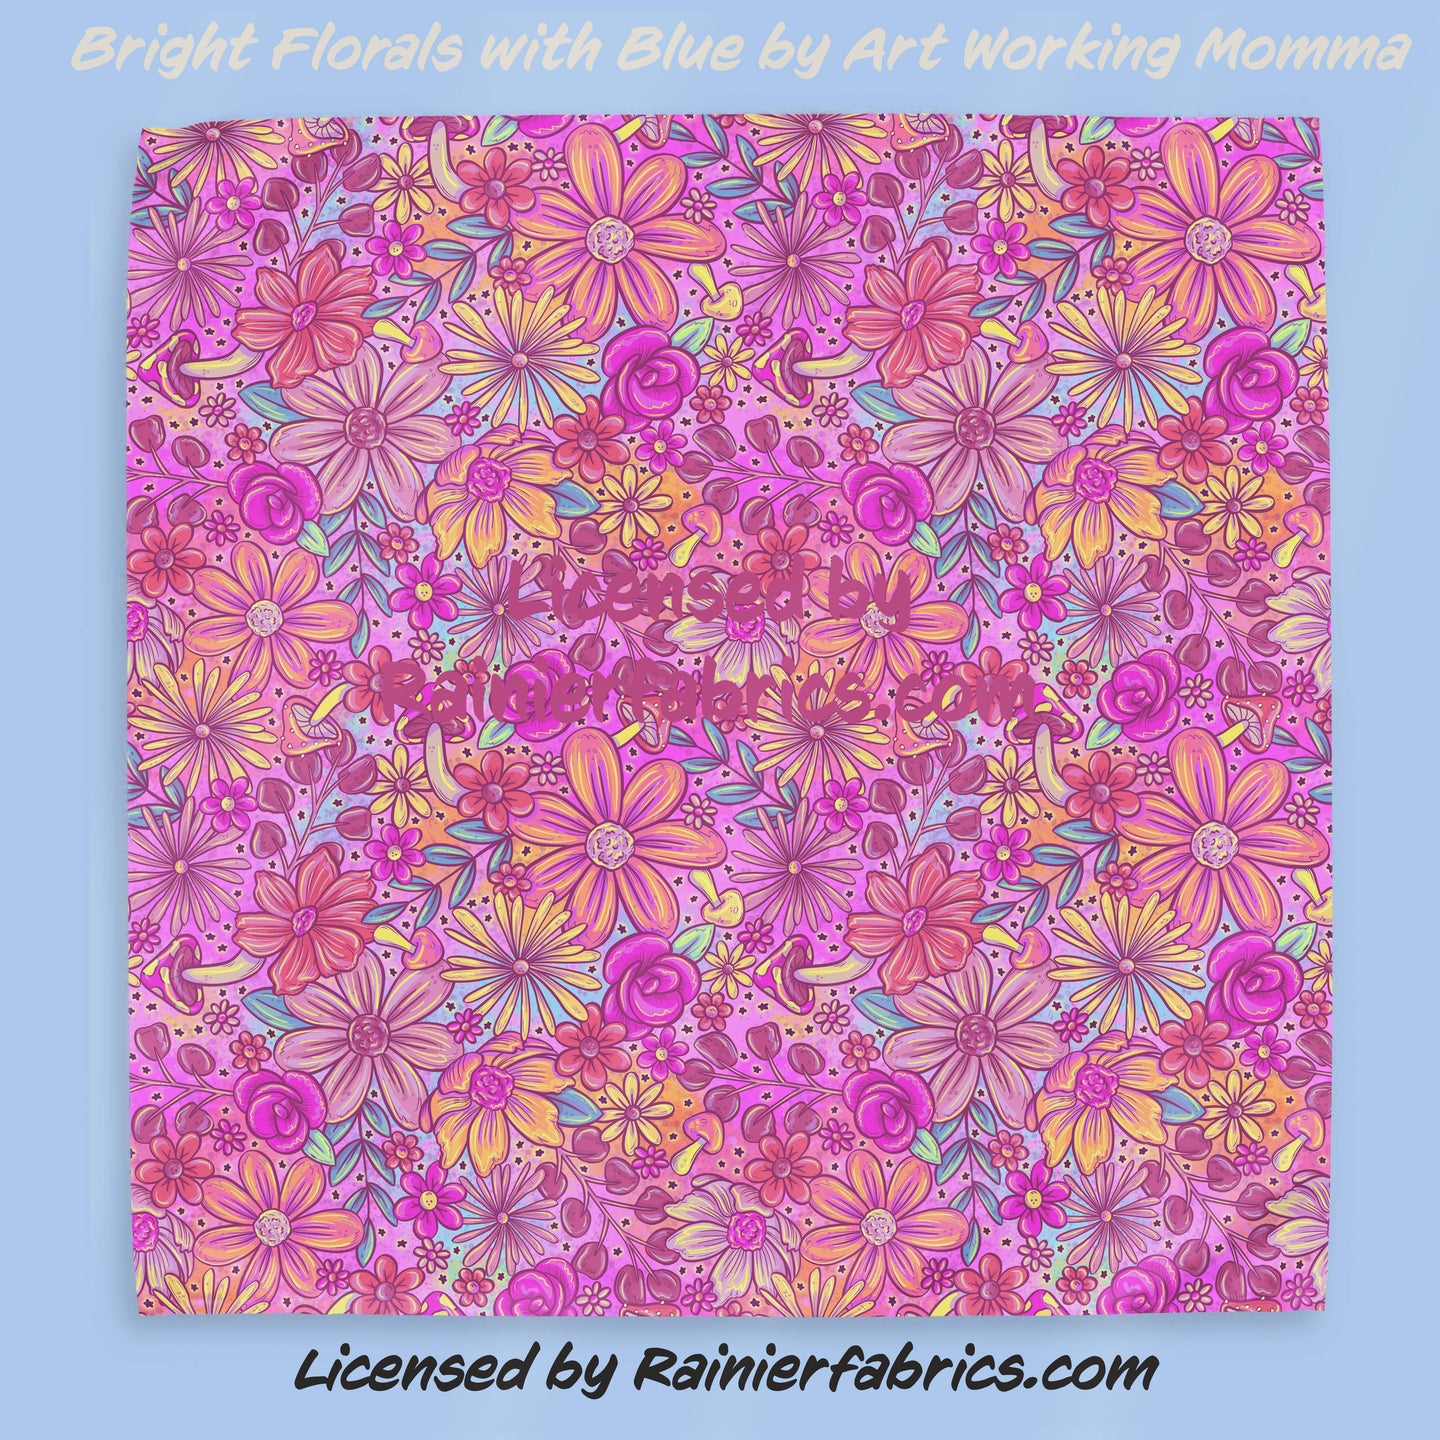 Bright Florals from Art Working Momma - with Blue - 2-5 business days to ship - Order by 1/2 yard